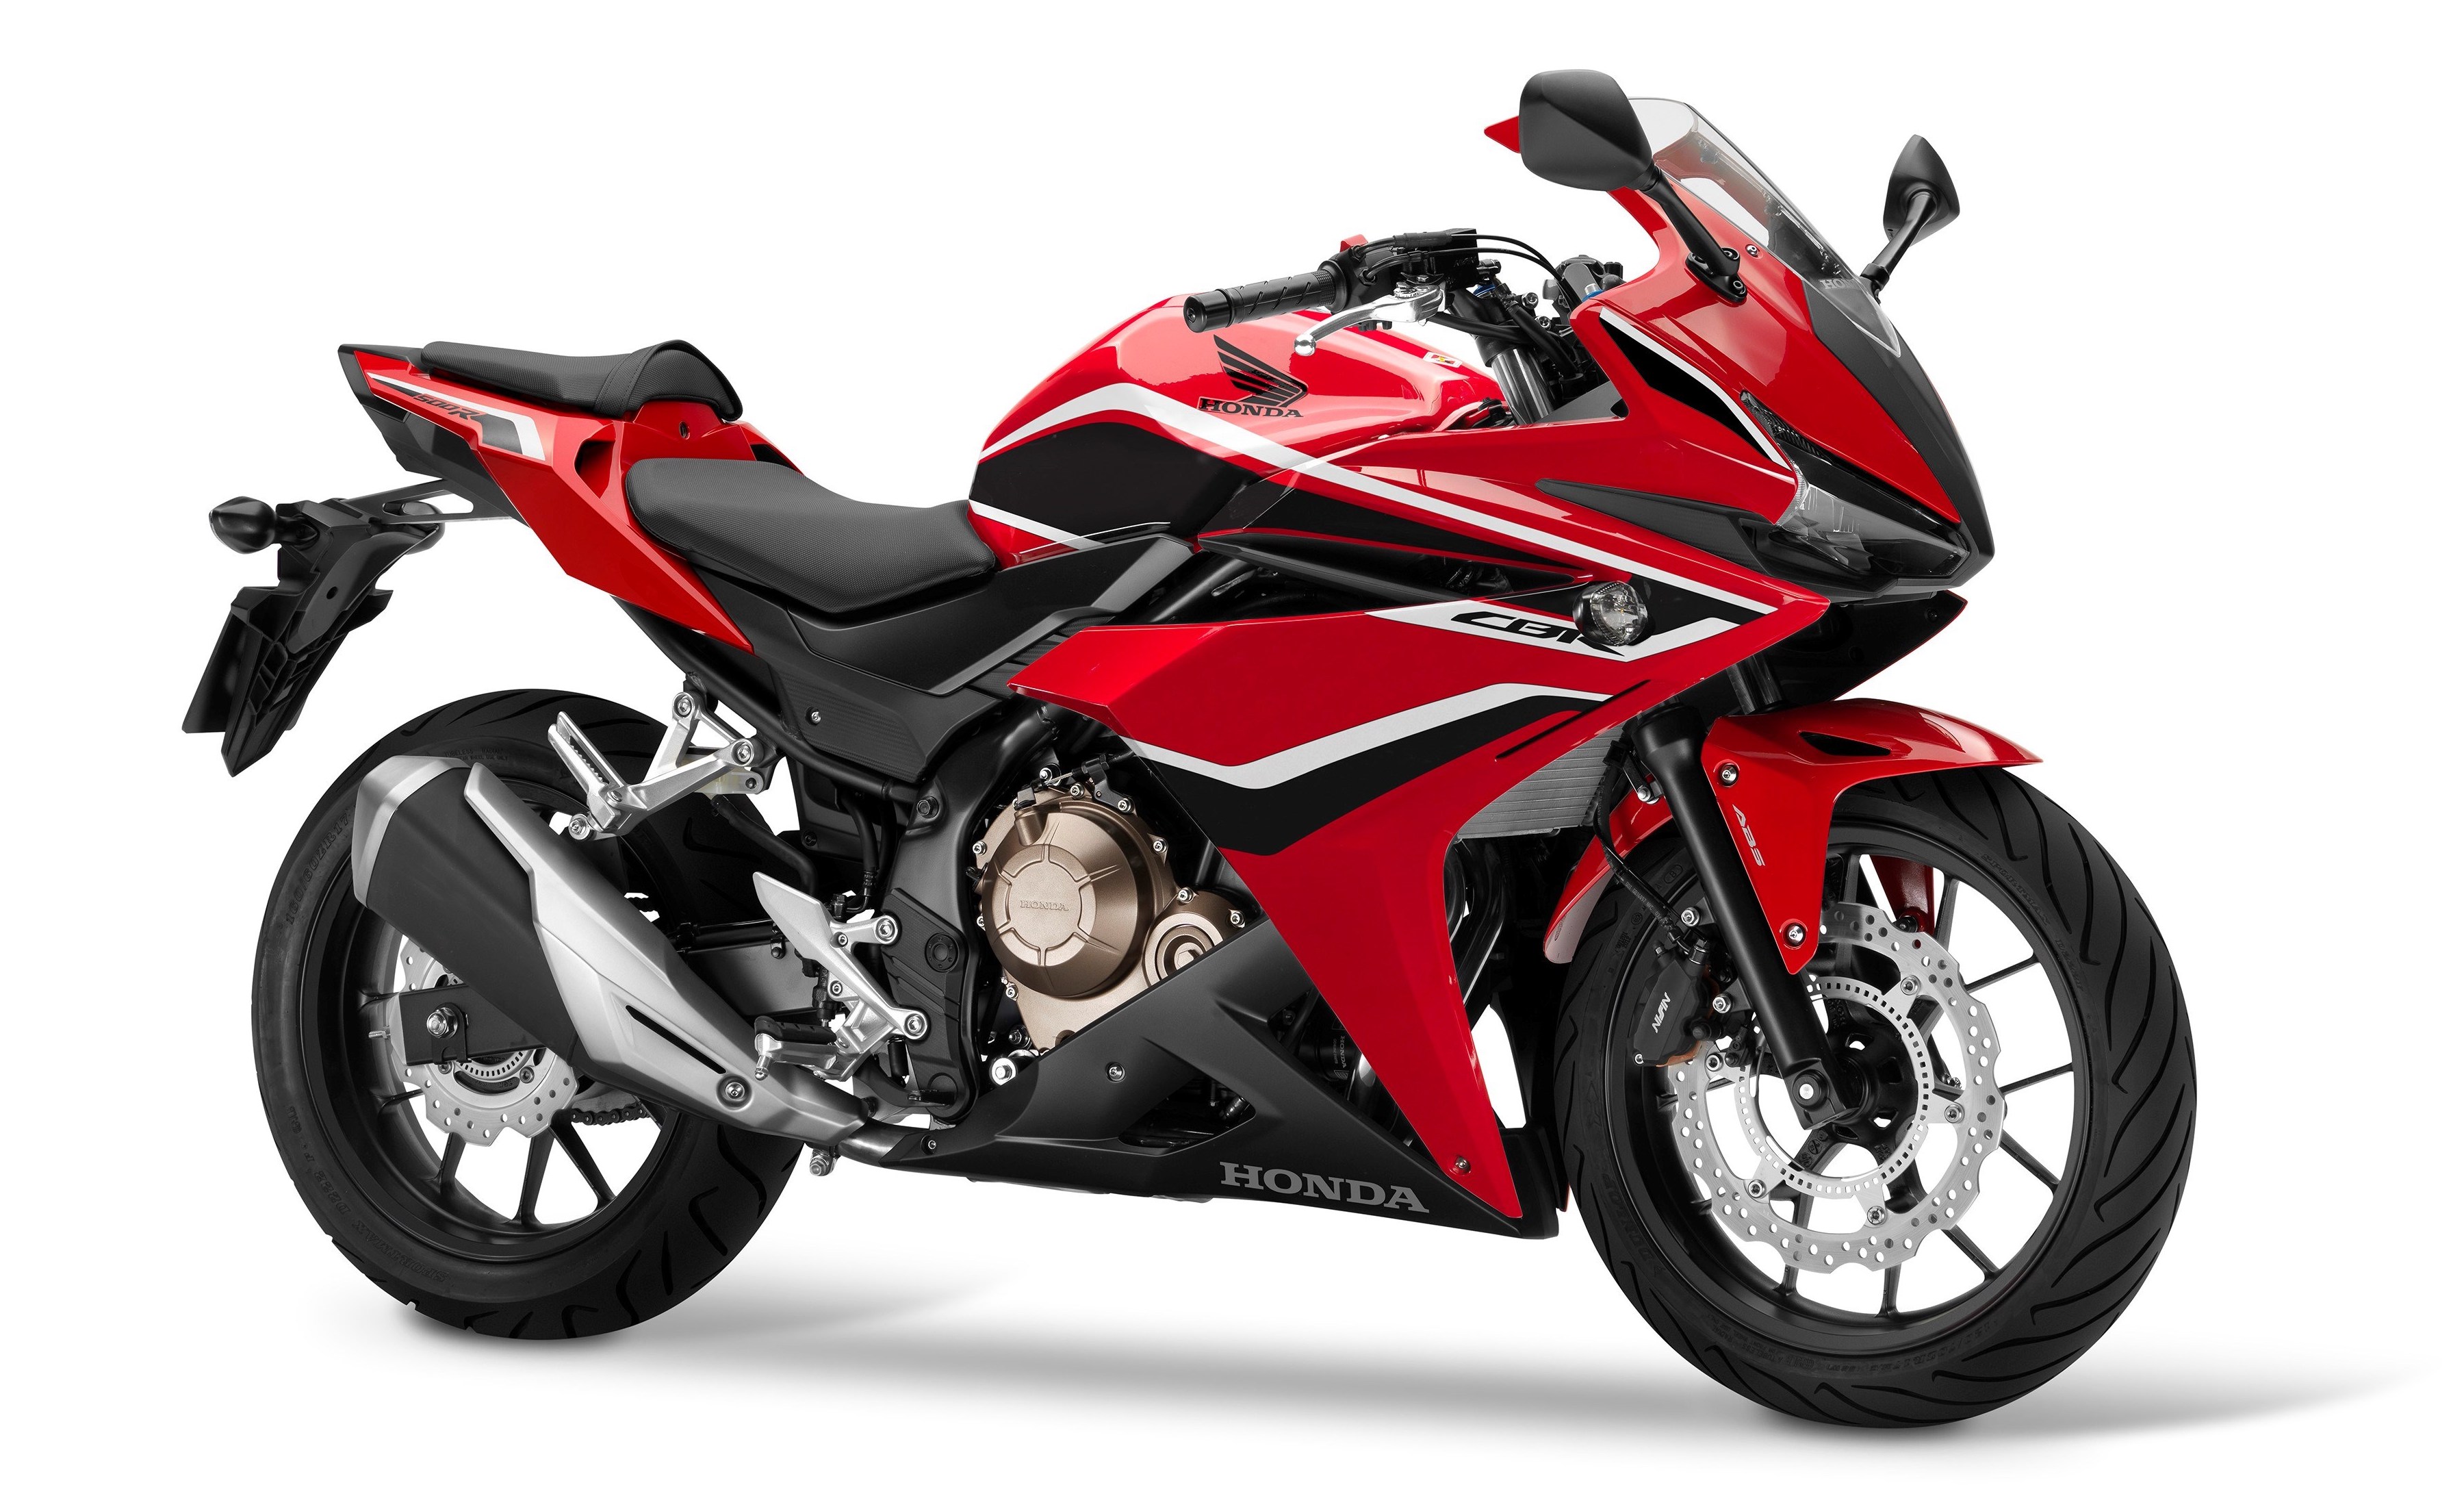 2018 Honda CB500F, CBR500R and CB500X released - now with ABS option ...